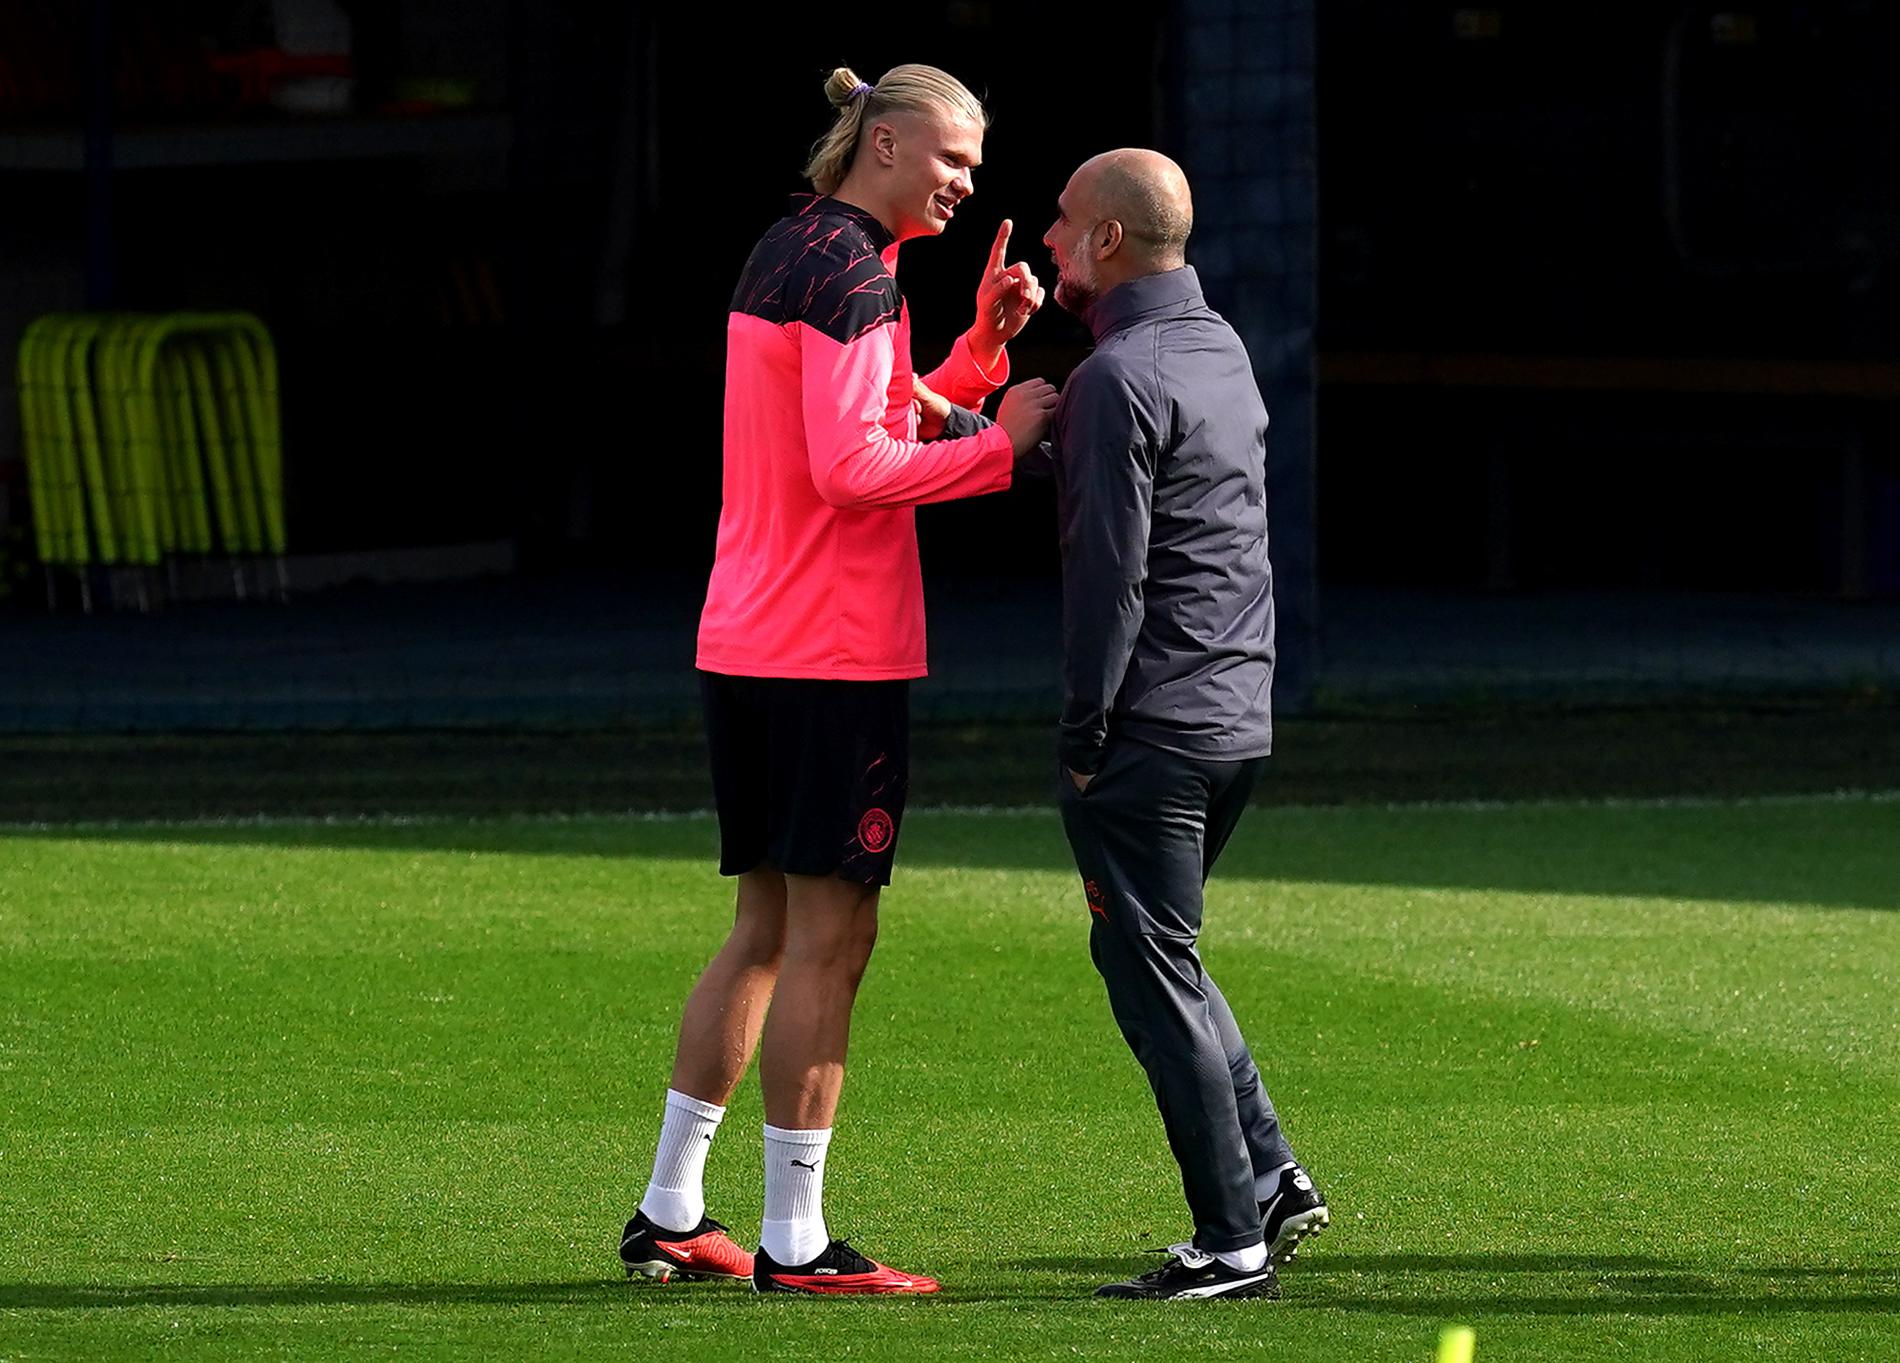 GOOD TONE: Between Erling Braut Haaland and manager Pep Guardiola in a training session earlier this week.